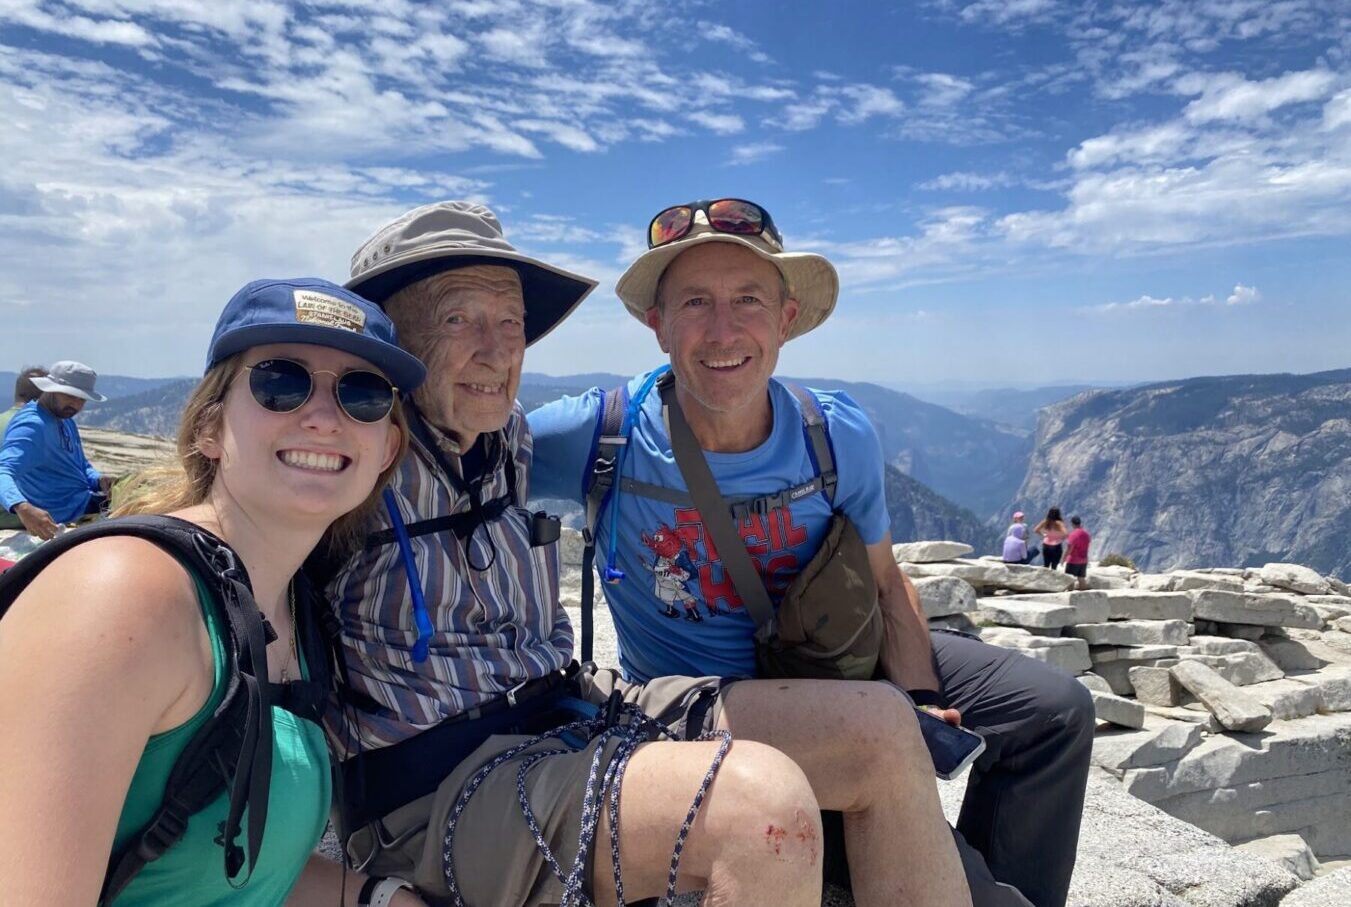 What did you do this summer? USC Leonard Davis student climbed Half Dome with her 93-year-old grandfather